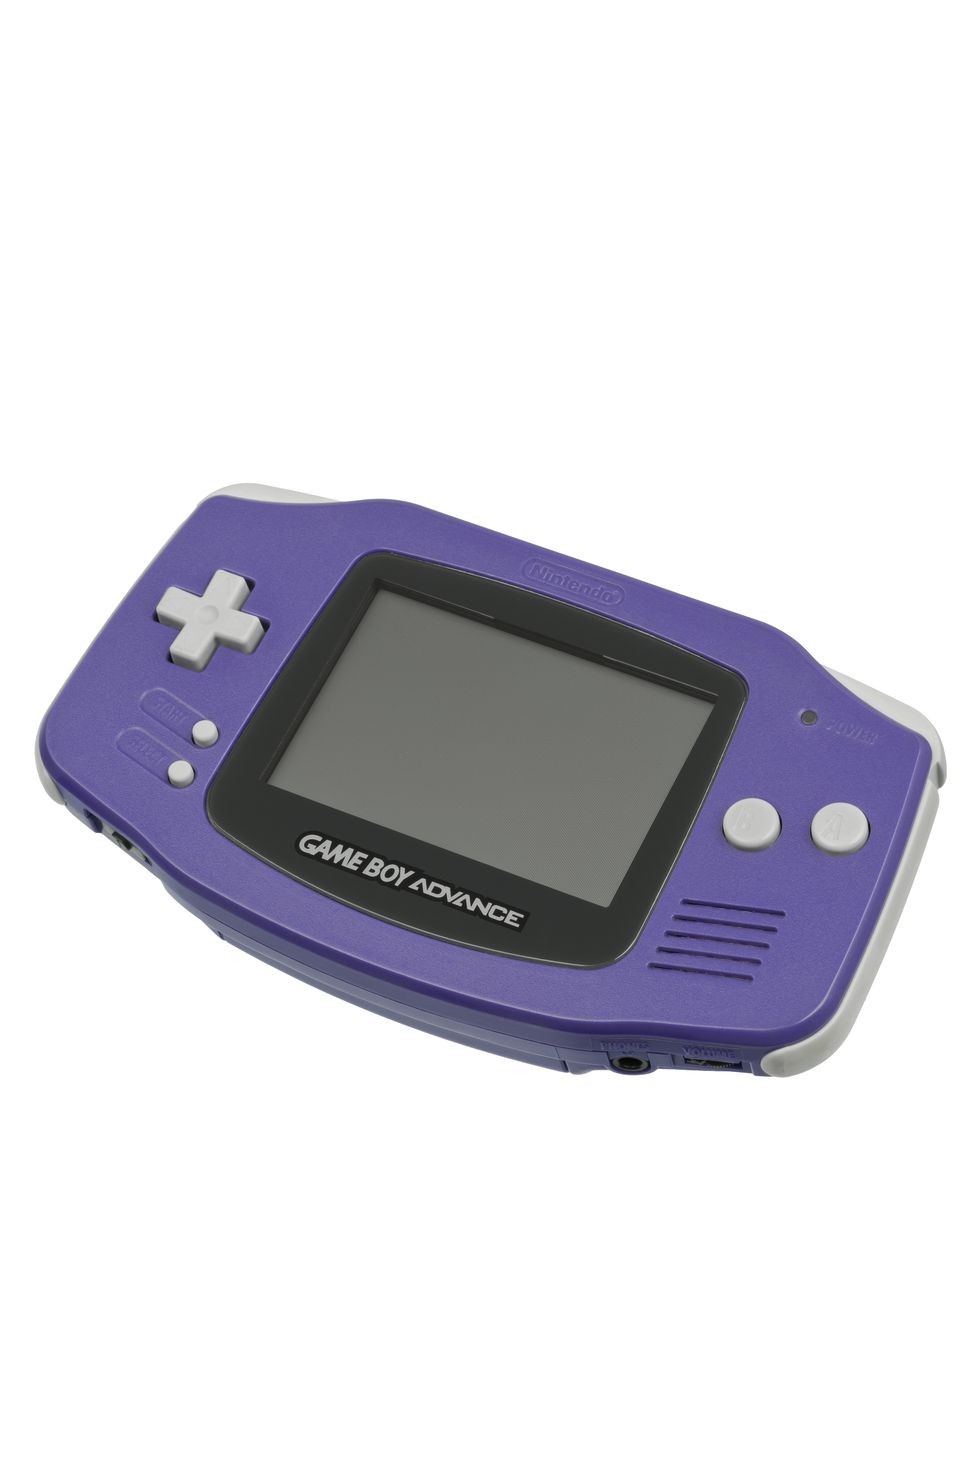 Recommend one lesser known or obscure Game Boy, Game Boy Color, or GBA game, Page 2